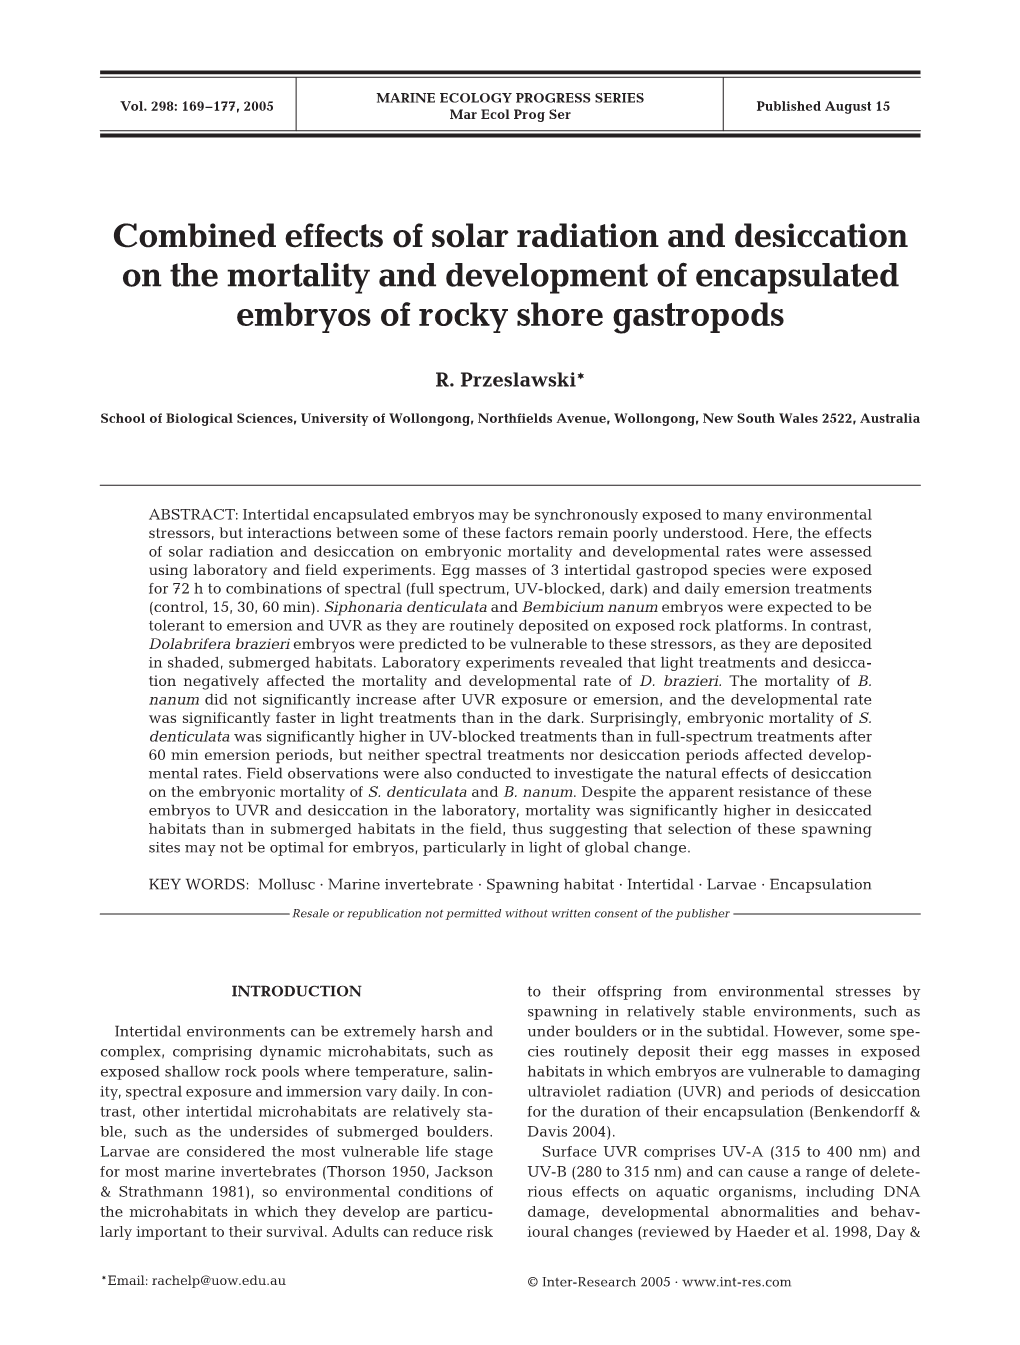 Combined Effects of Solar Radiation and Desiccation on the Mortality and Development of Encapsulated Embryos of Rocky Shore Gastropods